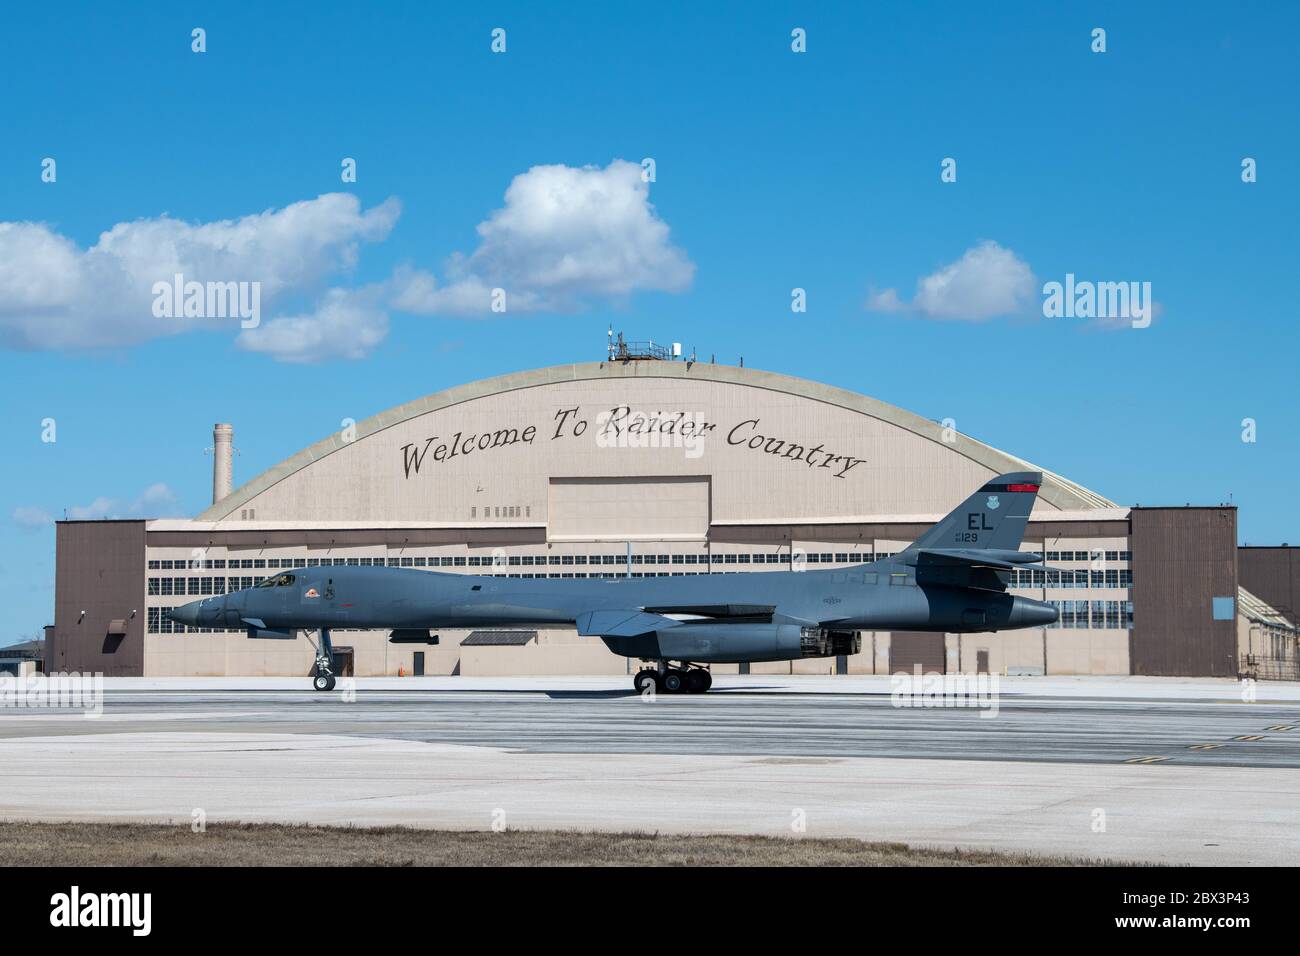 A U.S. Air Force B-1B Lancer stealth bomber aircraft from the 28th Bomb Wing, taxis on the flight line at Ellsworth Air Force Base March 23, 2020 in Rapid City, South Dakota. Stock Photo